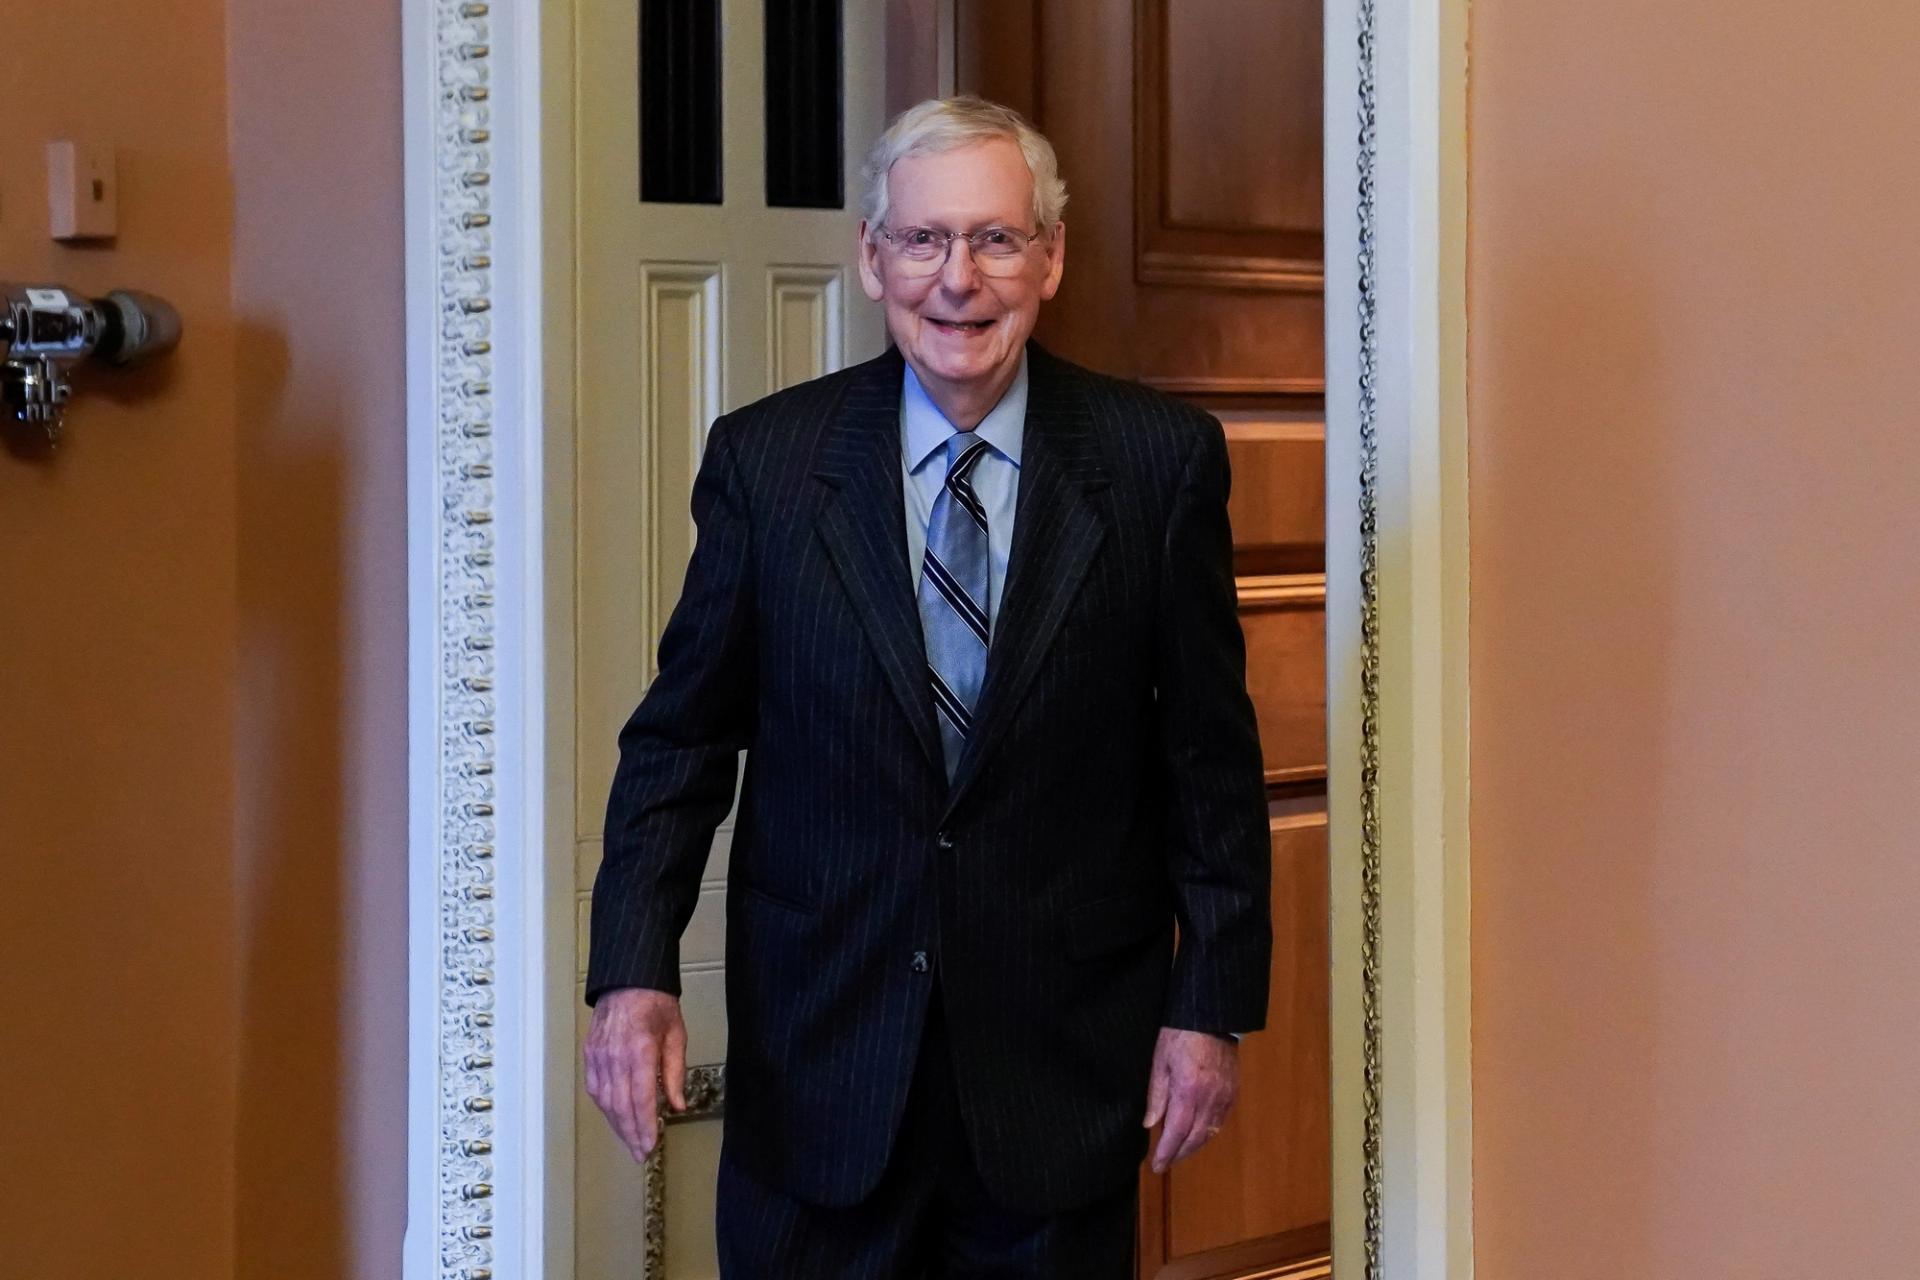 U.S. Senate Minority Leader Mitch McConnell (R-KY) returns to his office after announcing earlier in the day that he will step down this year from his leadership role, at the U.S. Capitol in Washington, U.S., February 28, 2024.